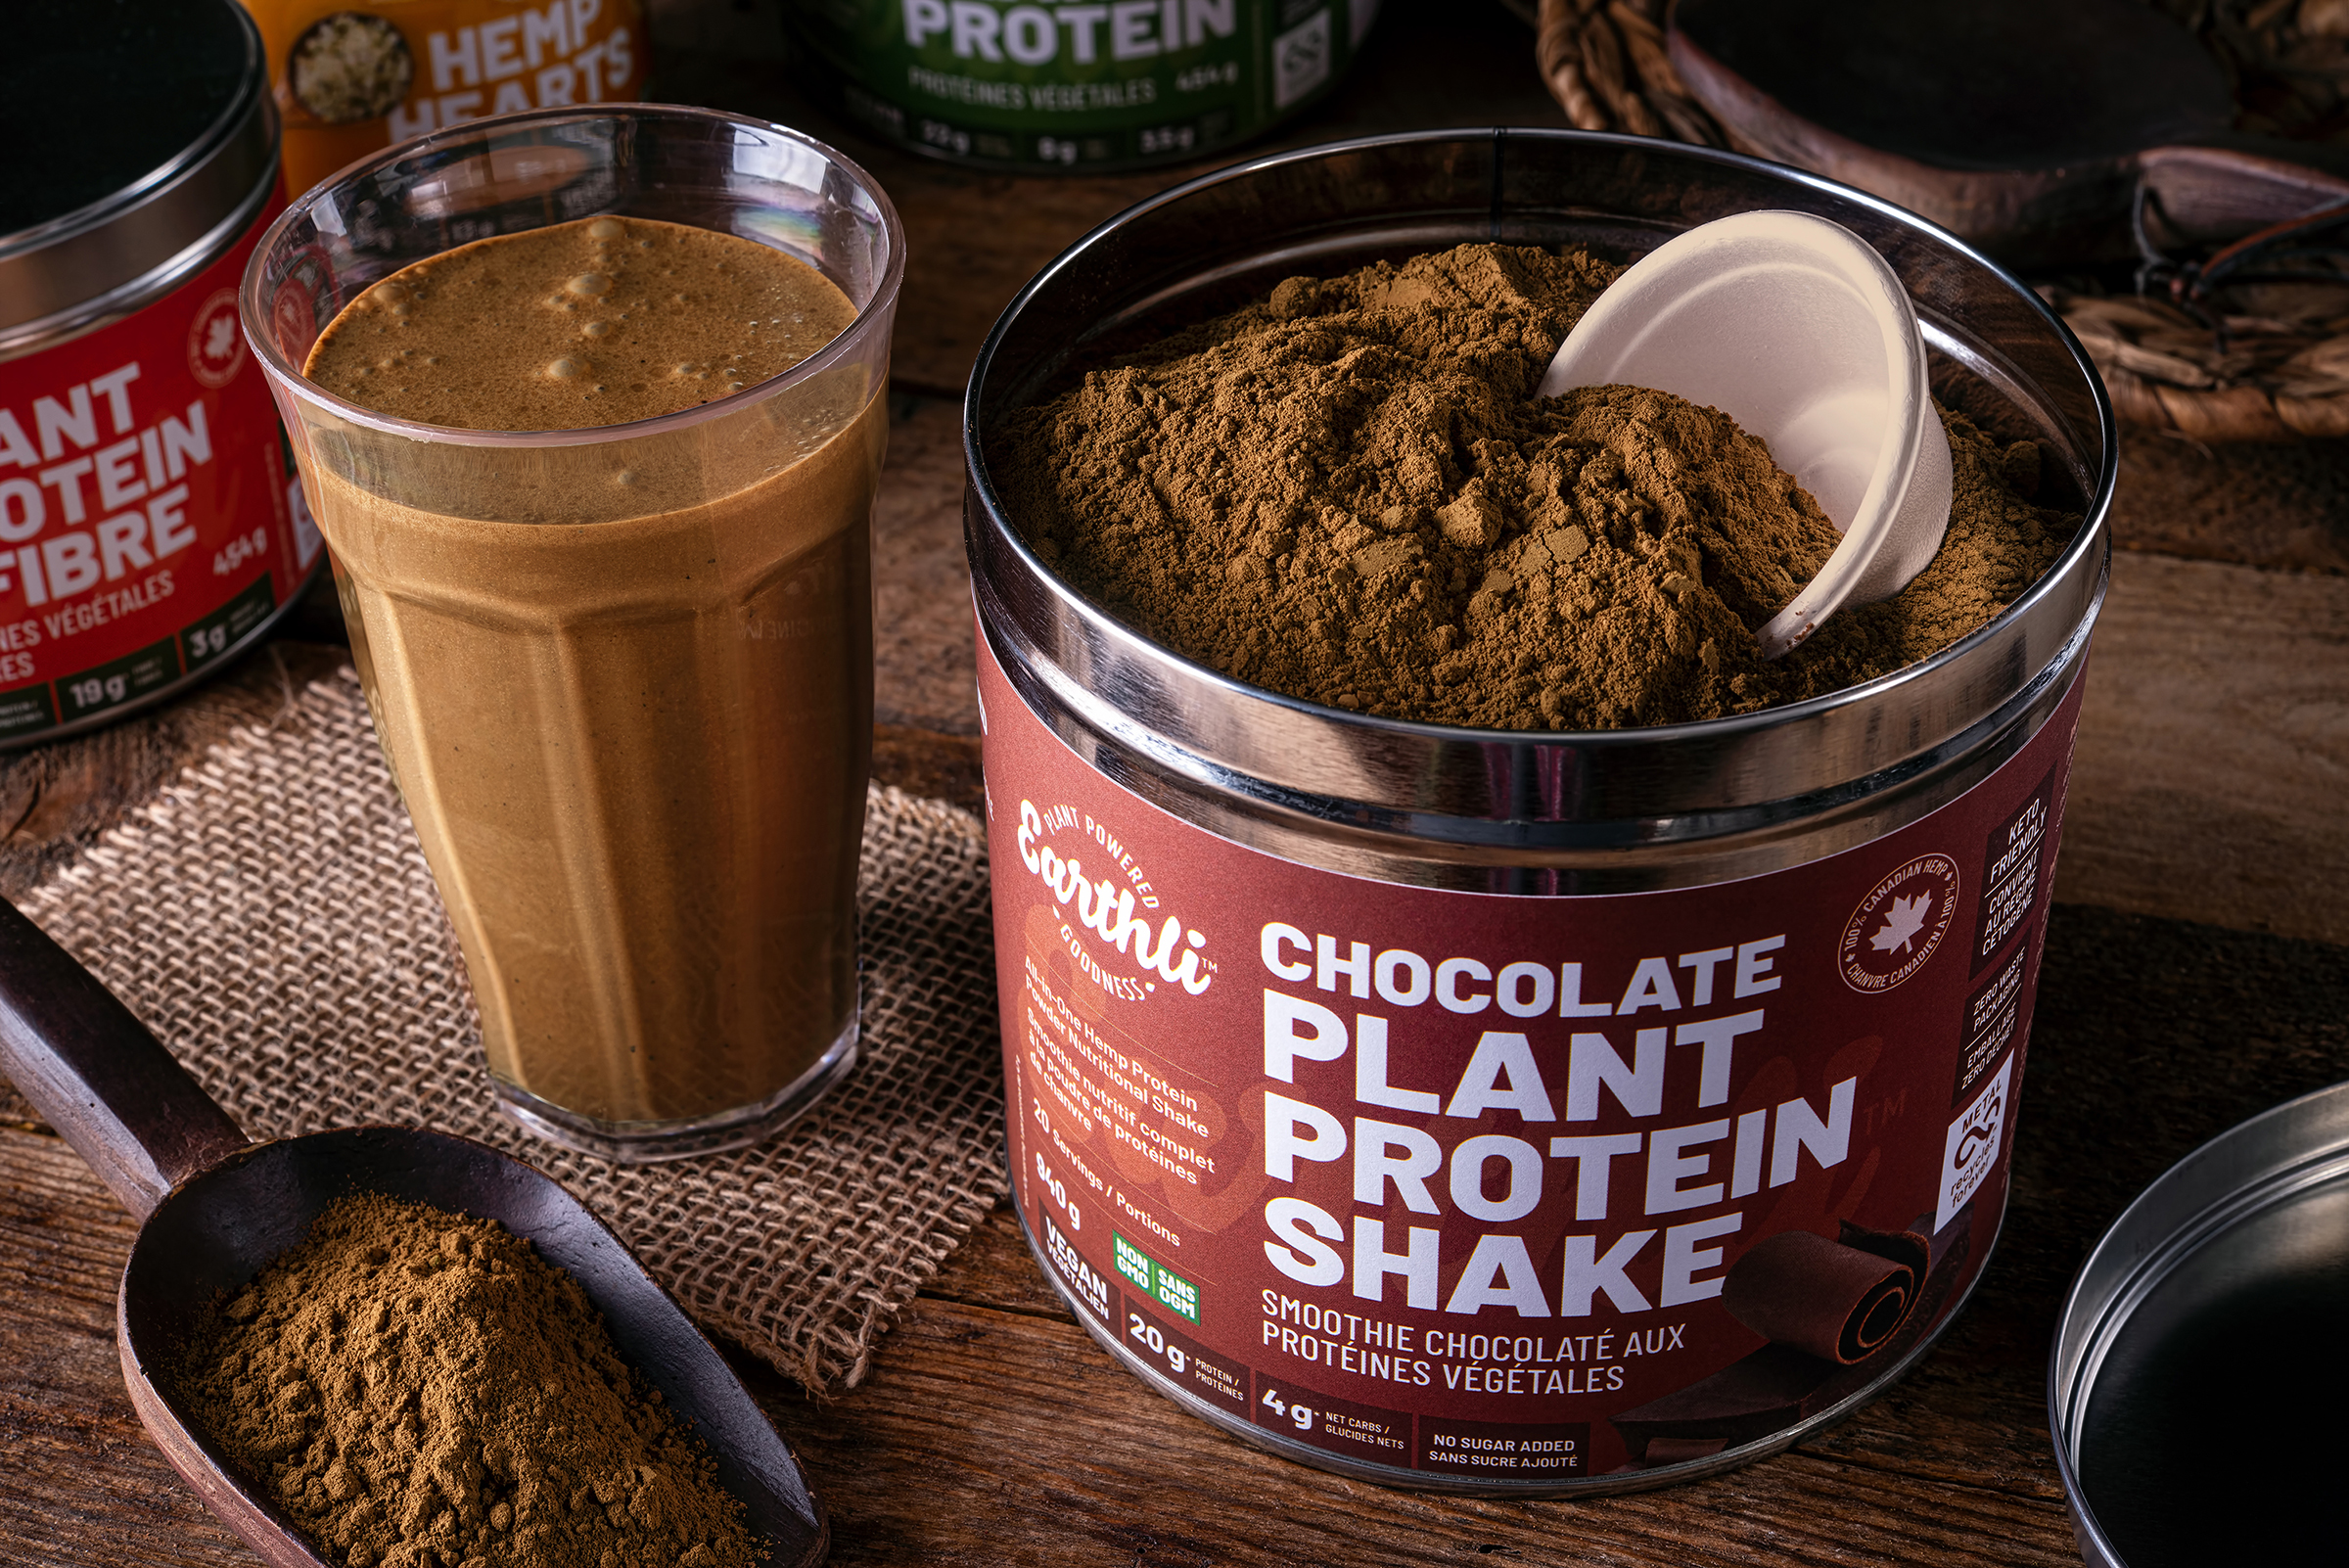 plant-based chocolate protein shake by Earthli